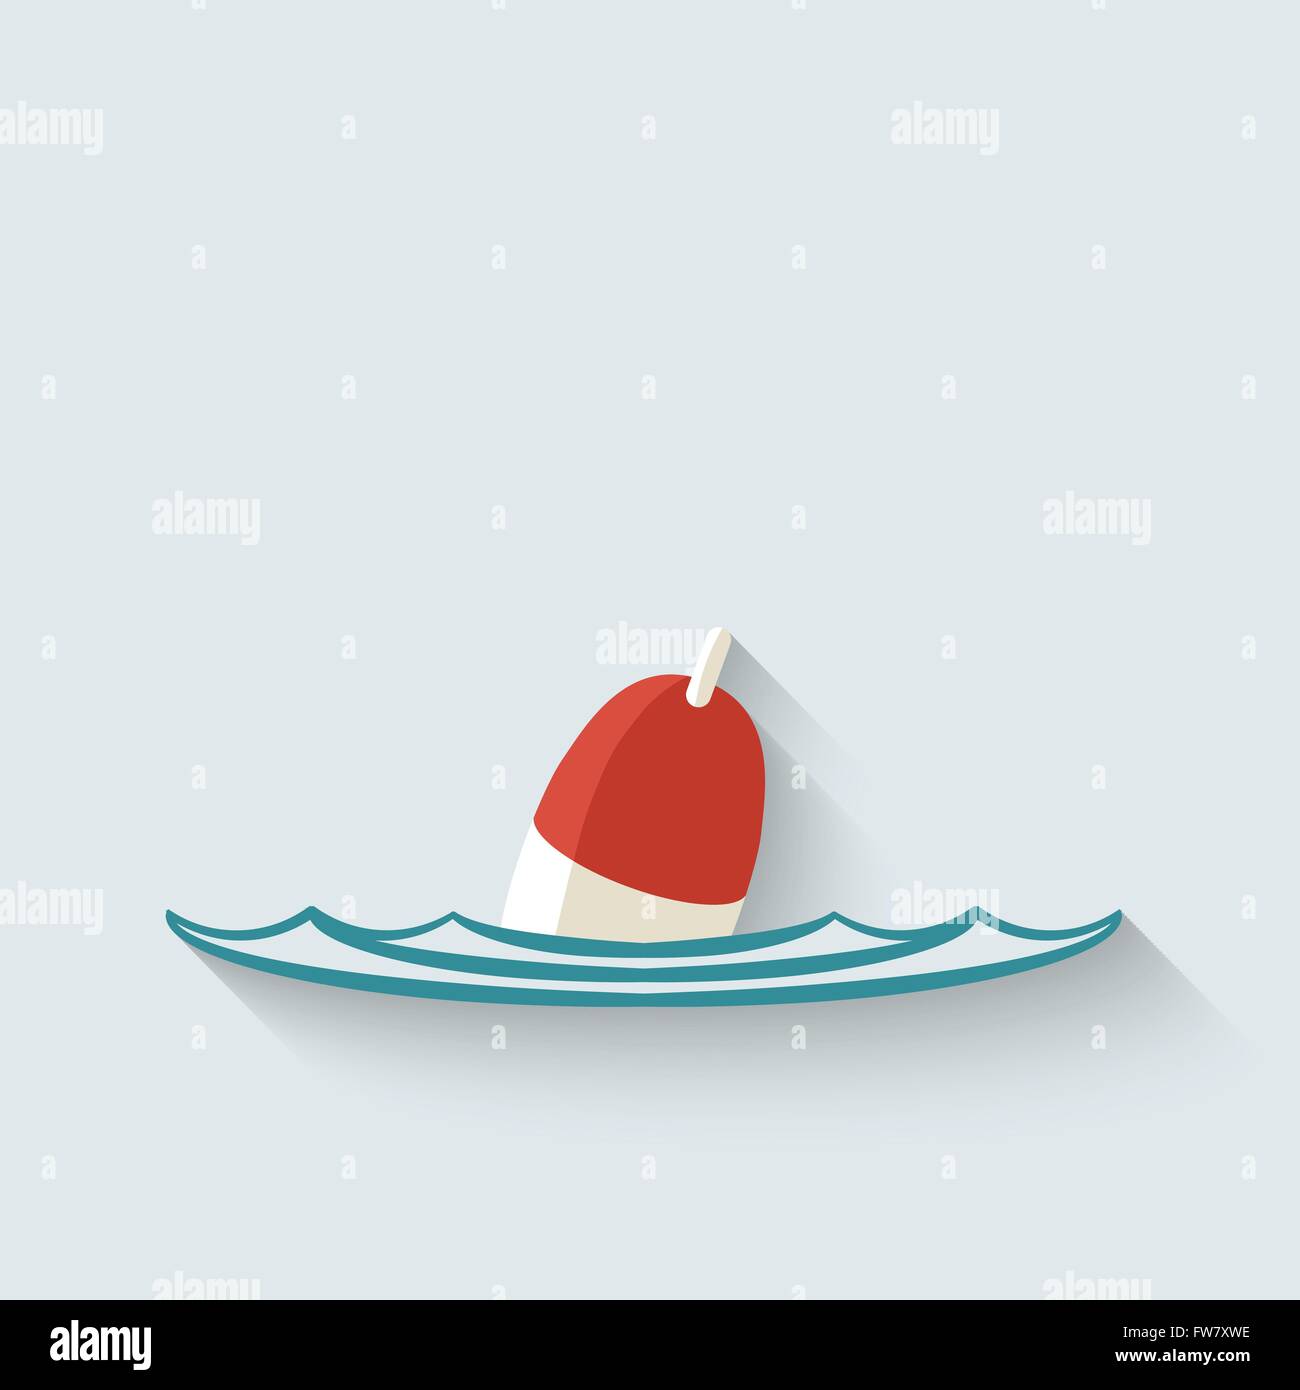 Bobber Water: Over 5,178 Royalty-Free Licensable Stock Vectors